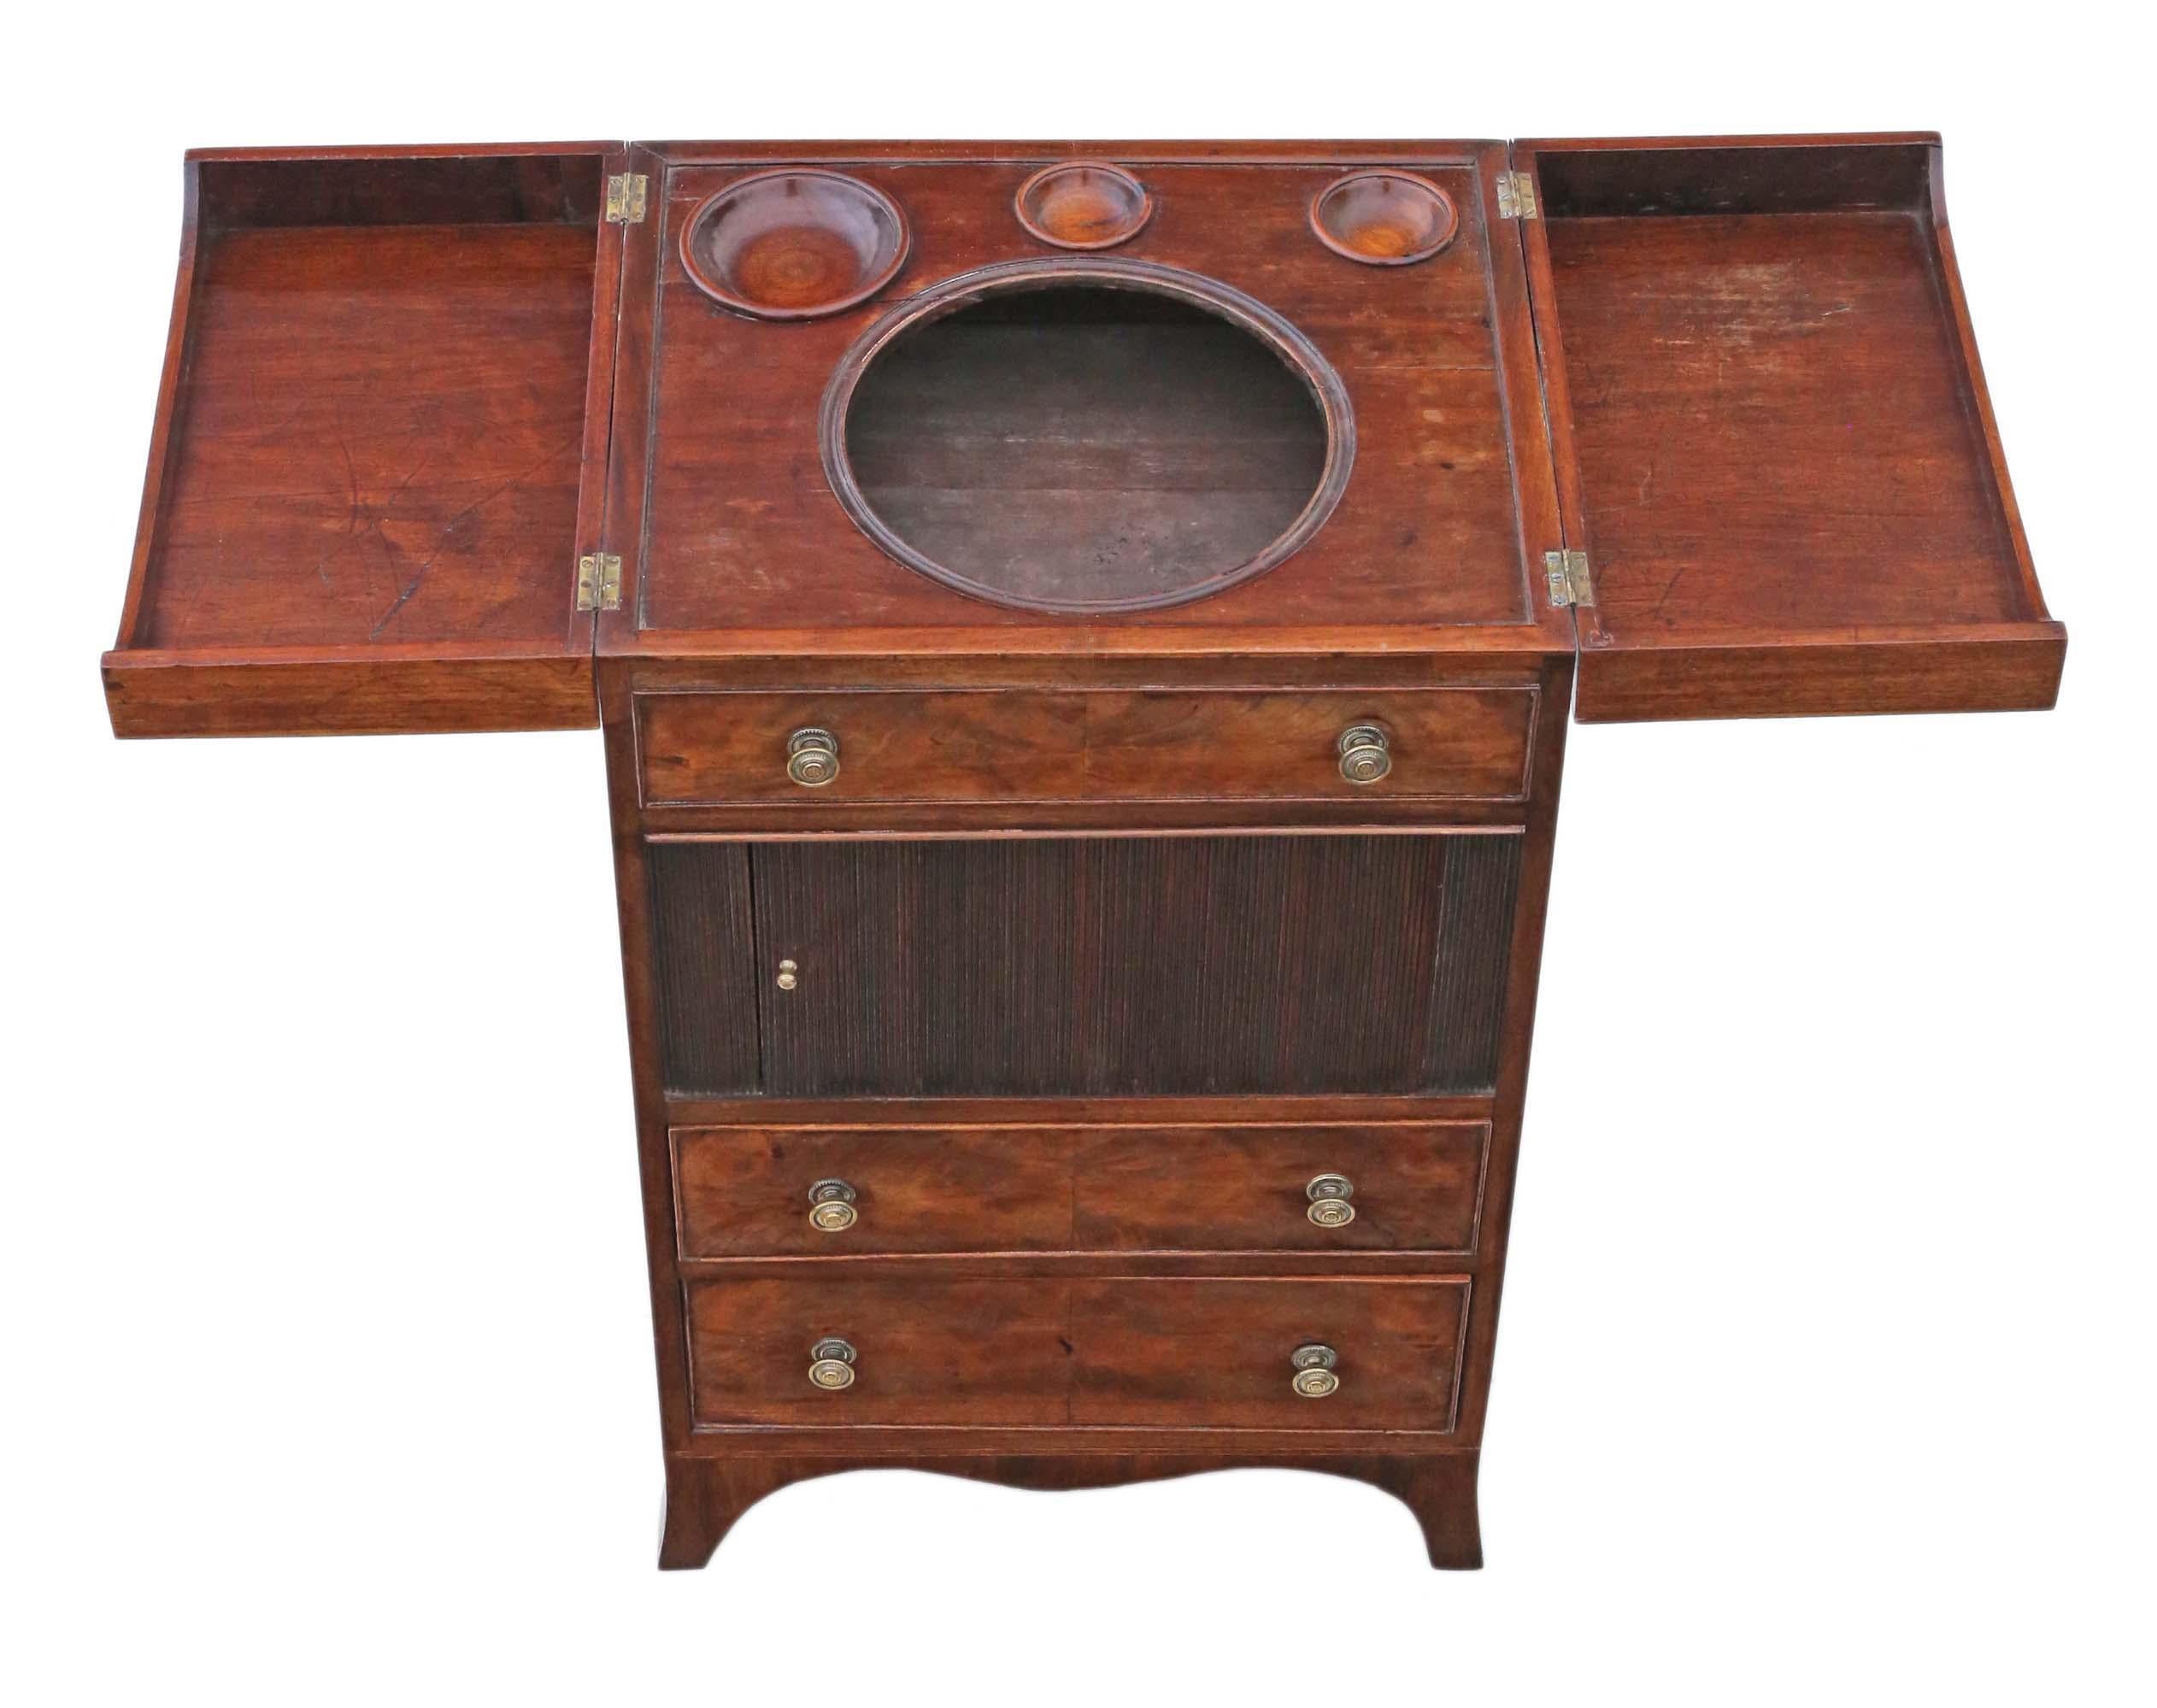 Early 19th Century Antique Large Flame Mahogany Washstand Bedside Table, C1800, Georgian